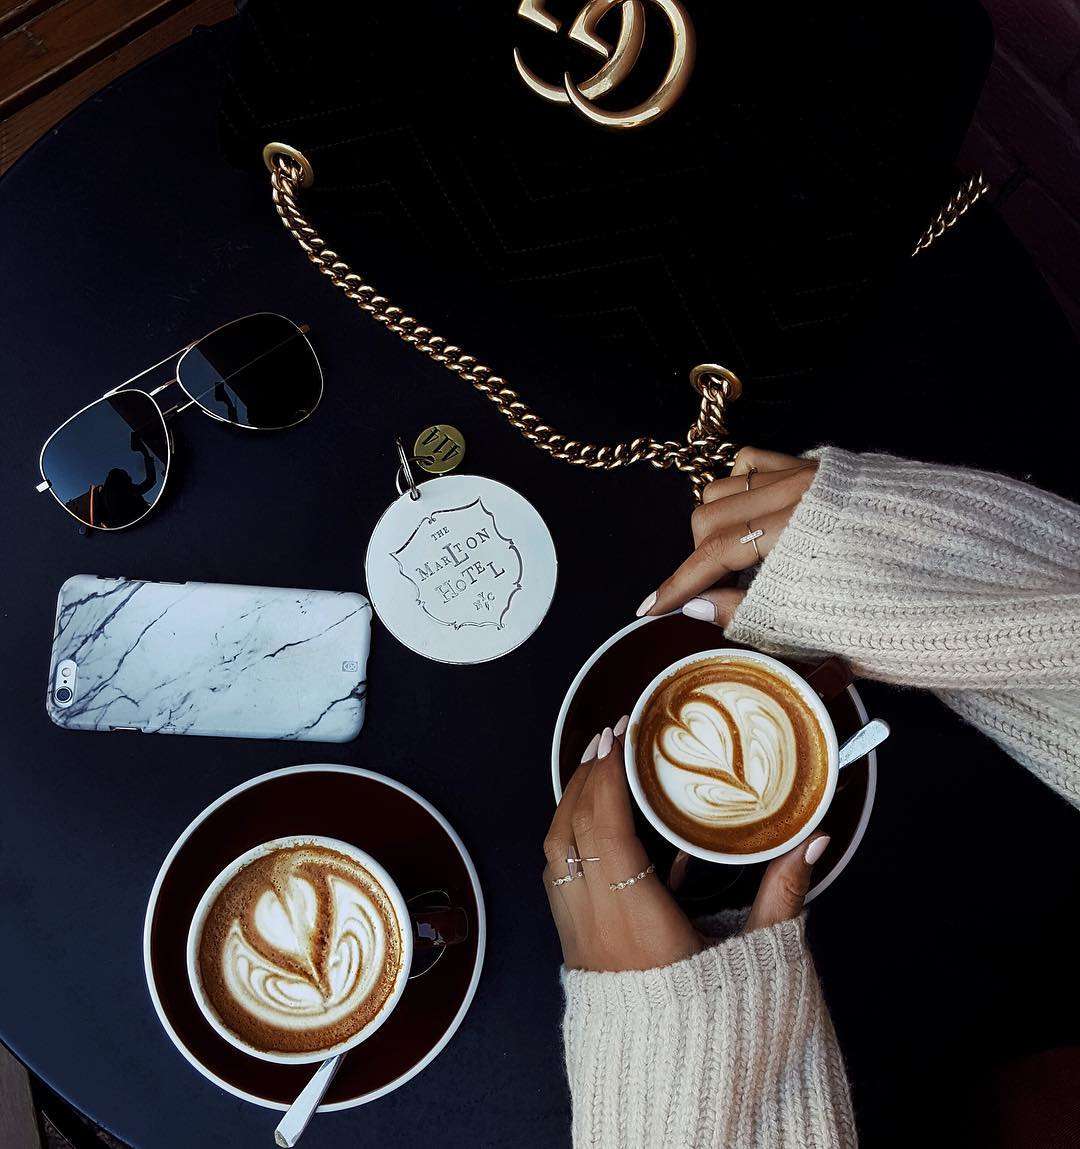 Where To Find The Best Airport Coffee - Coffee 'N Clothes